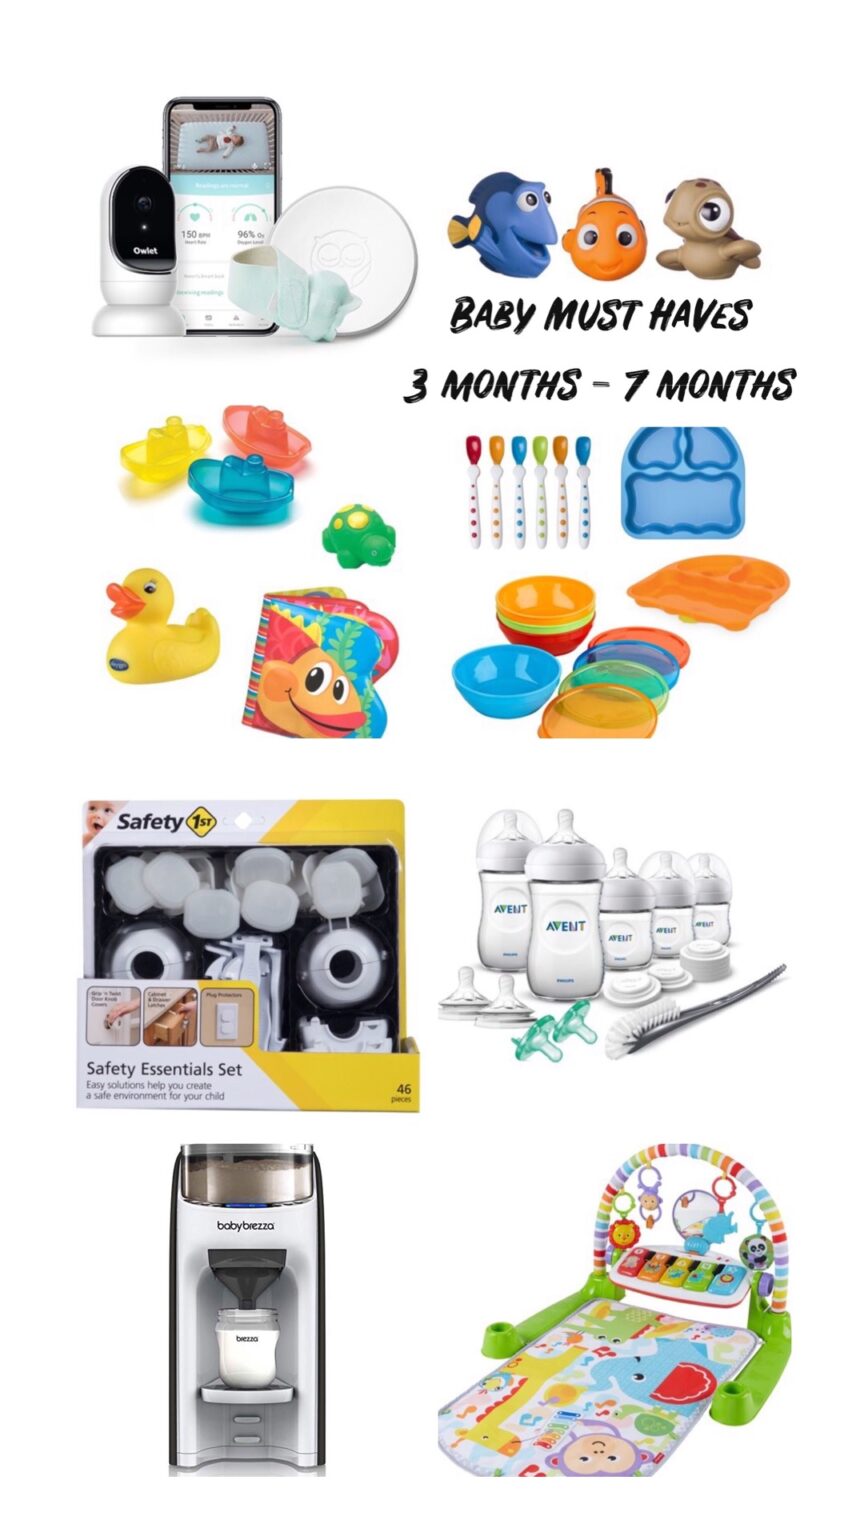 Must Have Baby Products: 3 months- 7 months - Nicole McIntosh